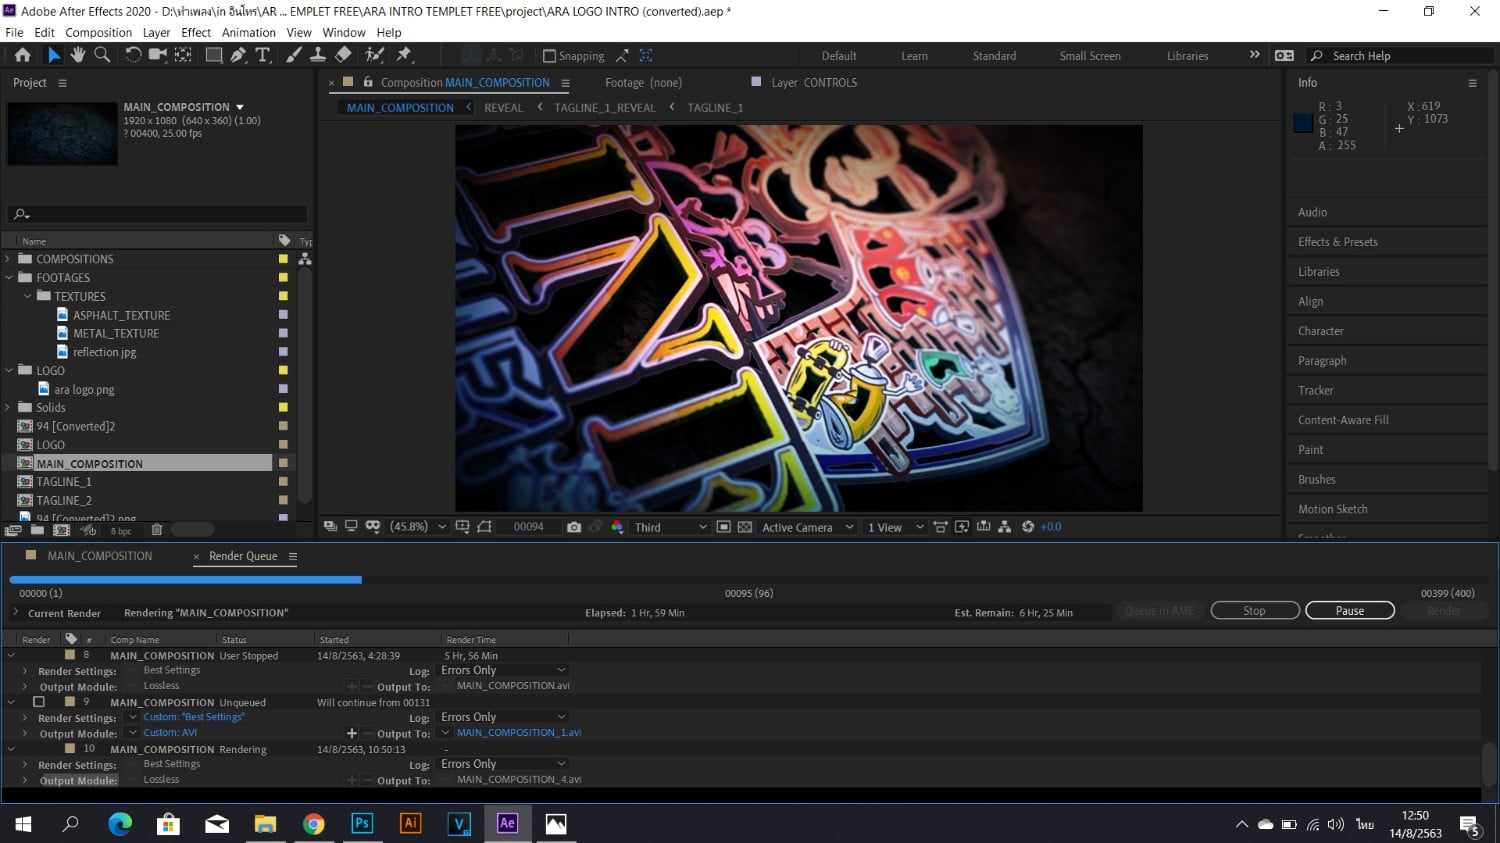 Adobe After Effects 2023 v23.0.0.59 Full